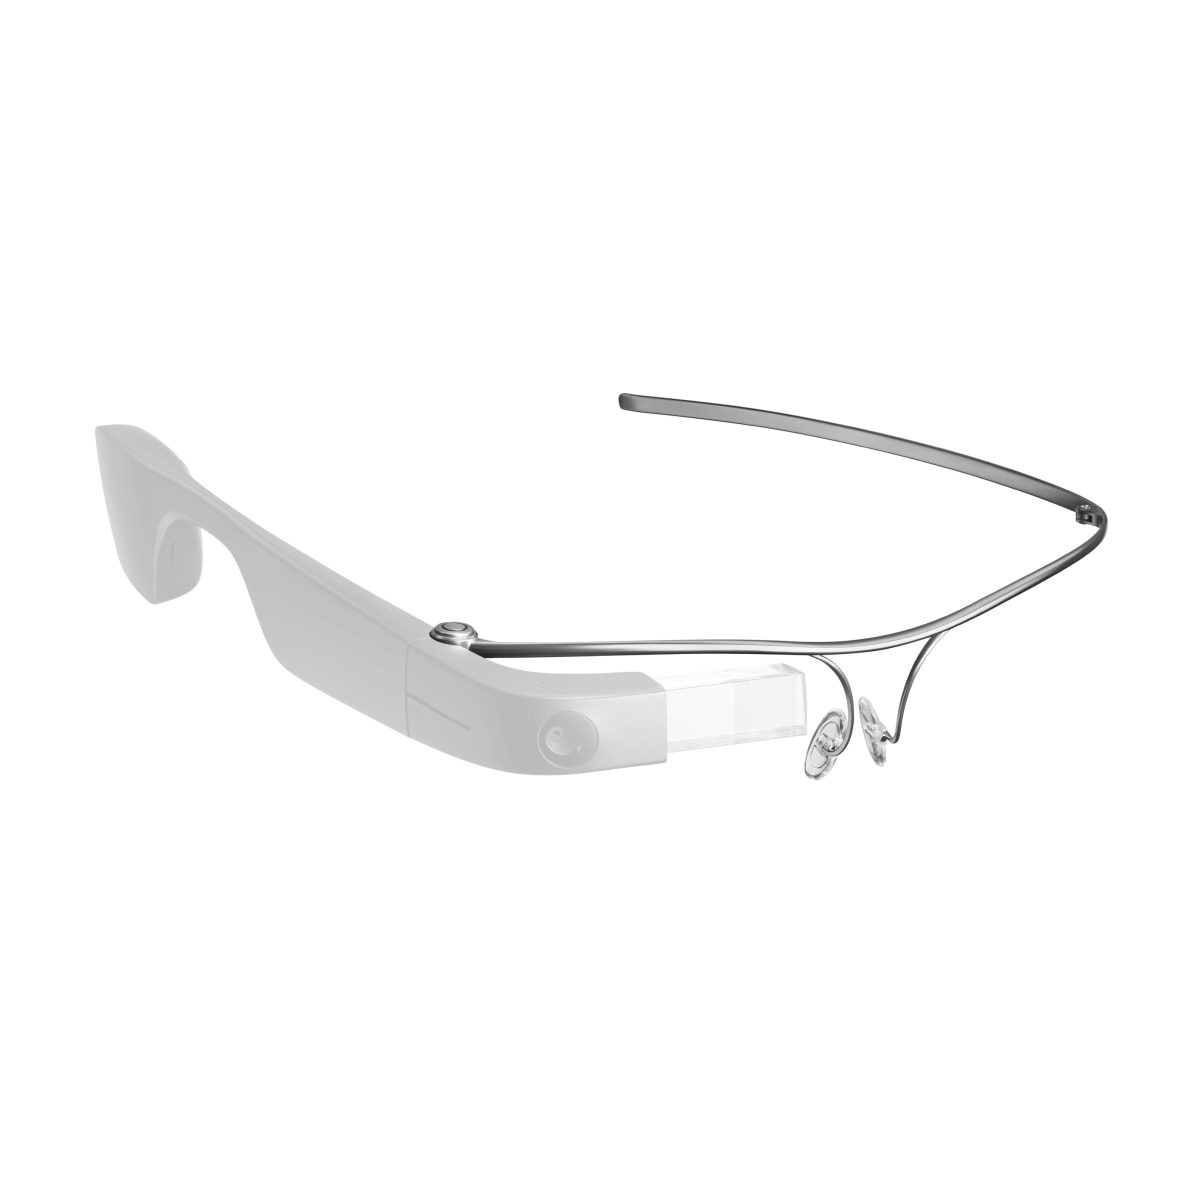 3/4 front view of the titanium lightweight frames that are attached to the Envision Glasses Body. The body of the Envision Glasses has a lowered transparency so the frame stands out more.